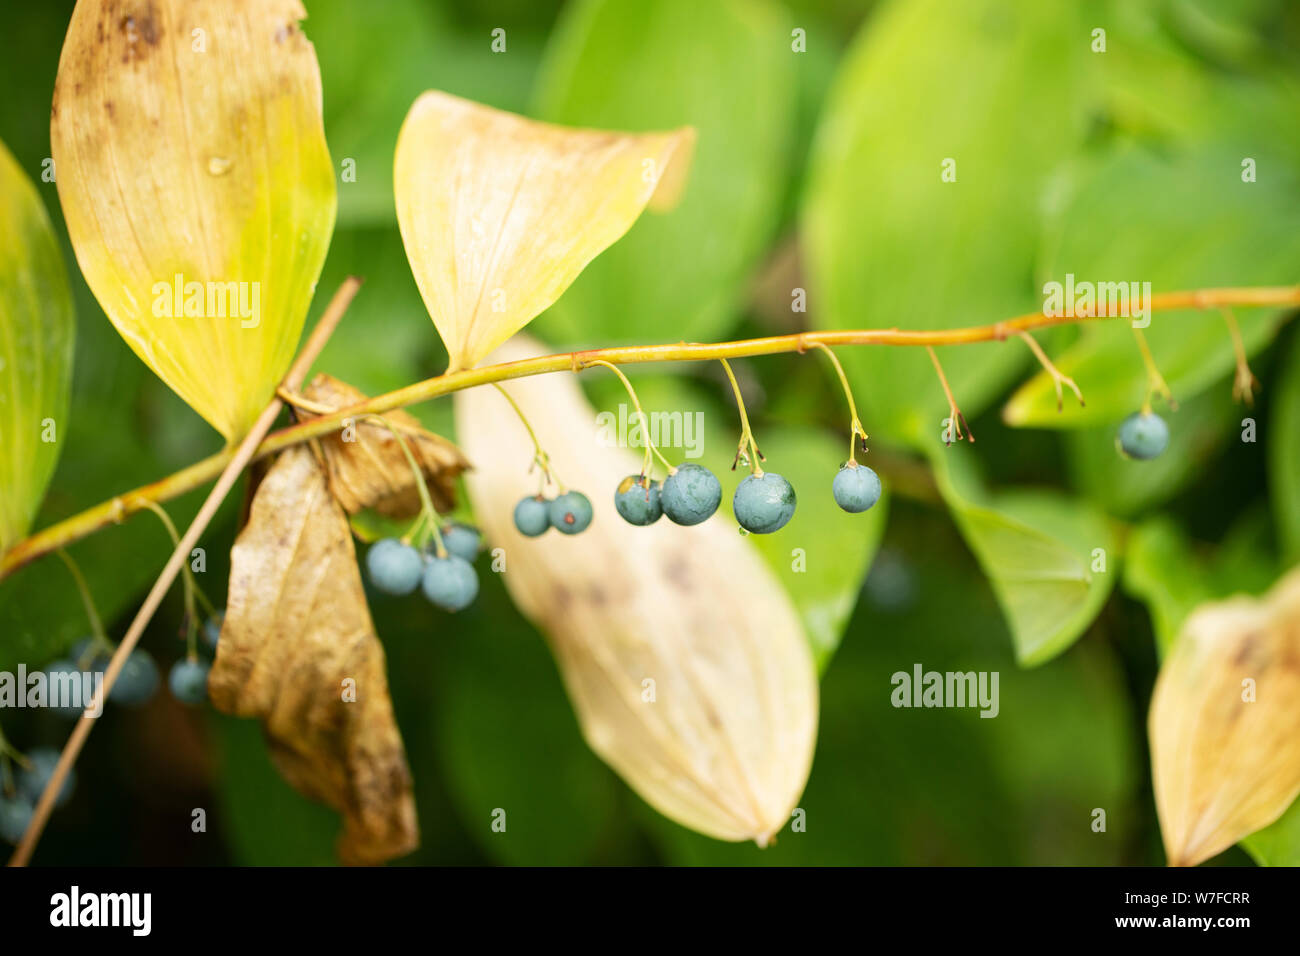 Blue berries on a Polygonatum odoratum plant, known as Solomon's seal,  in family Asparagaceae. This flowering plant is native to Europe and Asia. Stock Photo